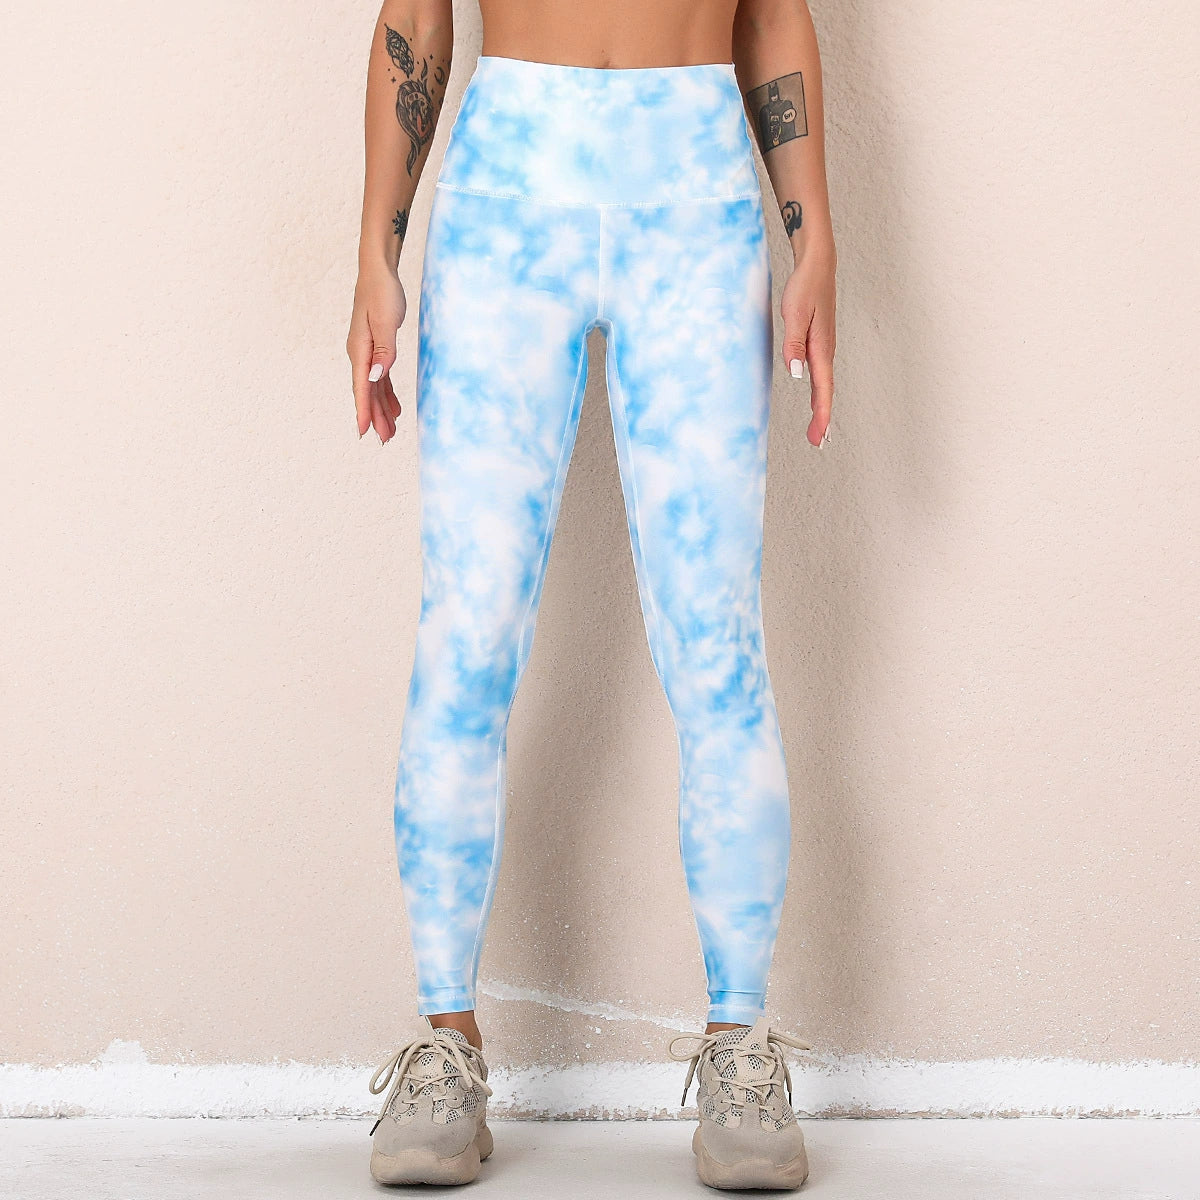 Fashion Tie-Dye Yoga Pants for Women: Stylish Hip-Lifting Fitness Clothes